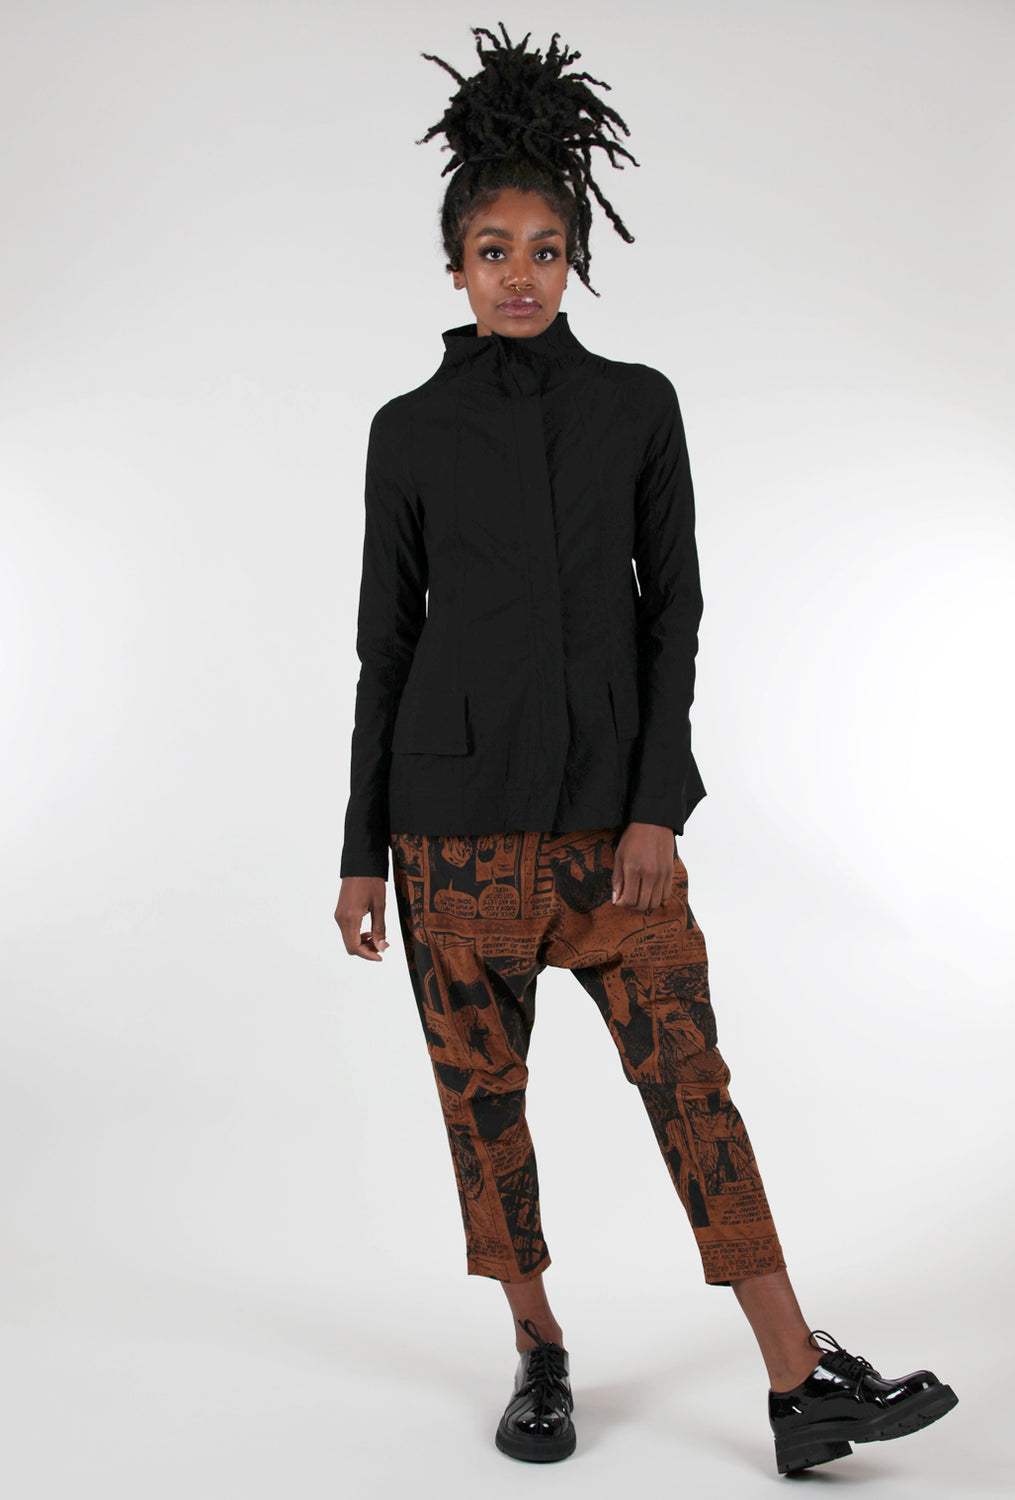 Rundholz Sig Stretch Slouch Rise Trouser, Brick Comic 